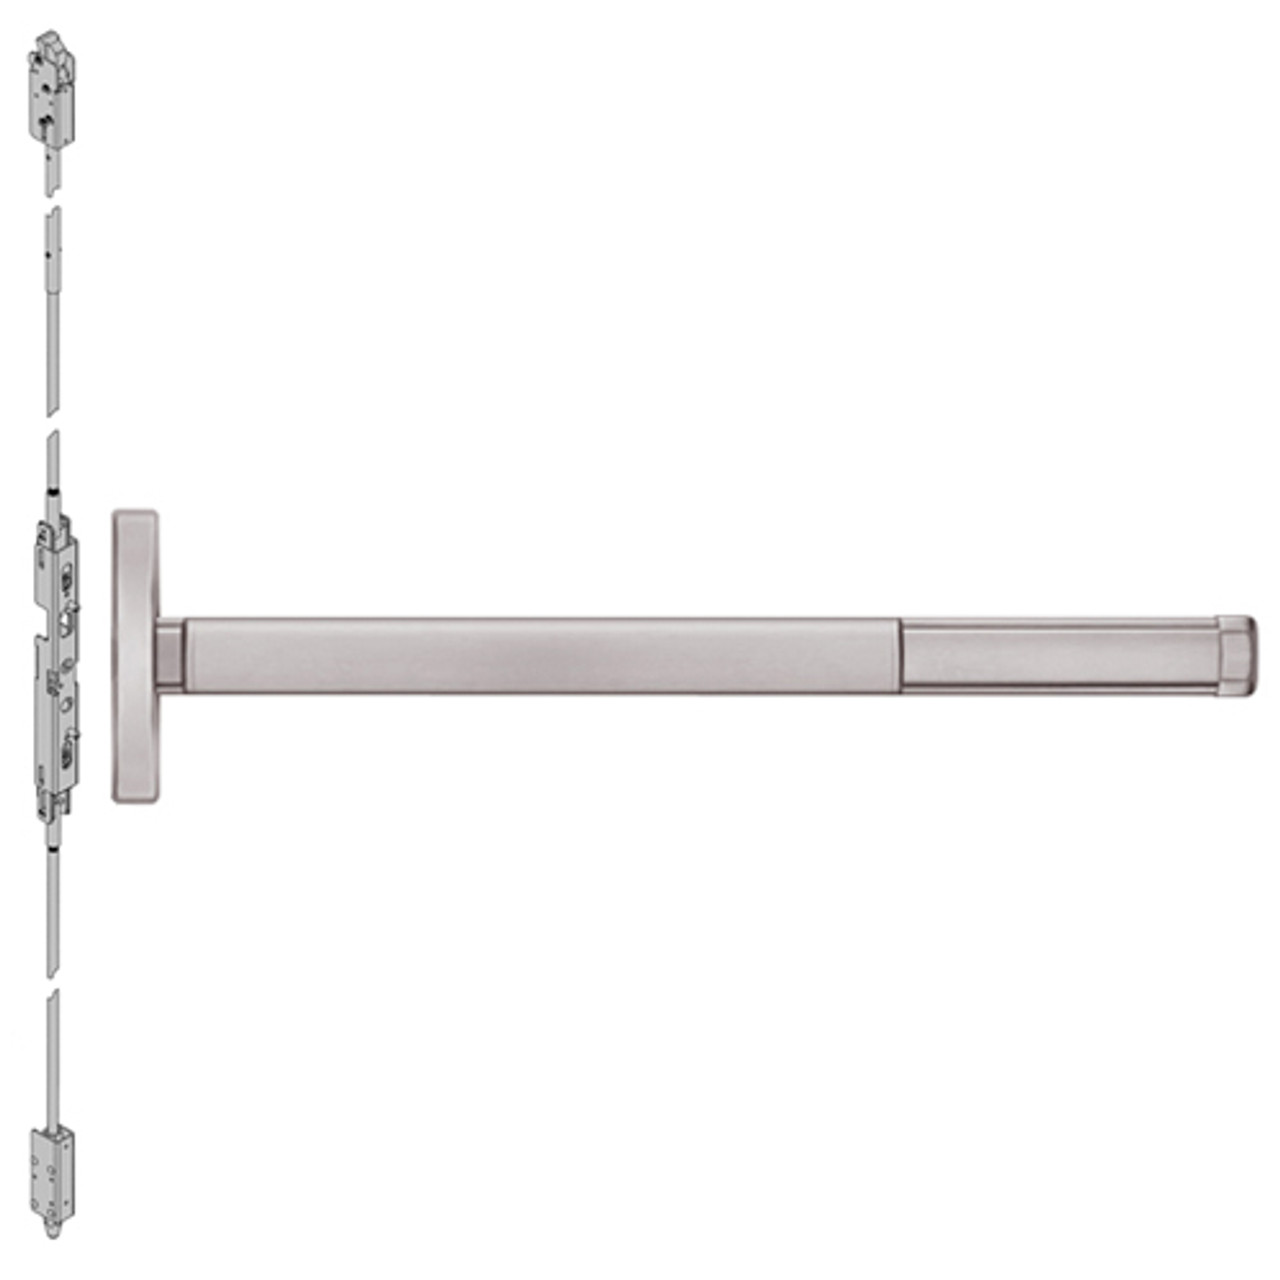 ELR2614-628-48 PHI 2600 Series Concealed Vertical Rod Exit Device with Electric Latch Retraction Prepped for Lever Always Active in Satin Aluminum Finish